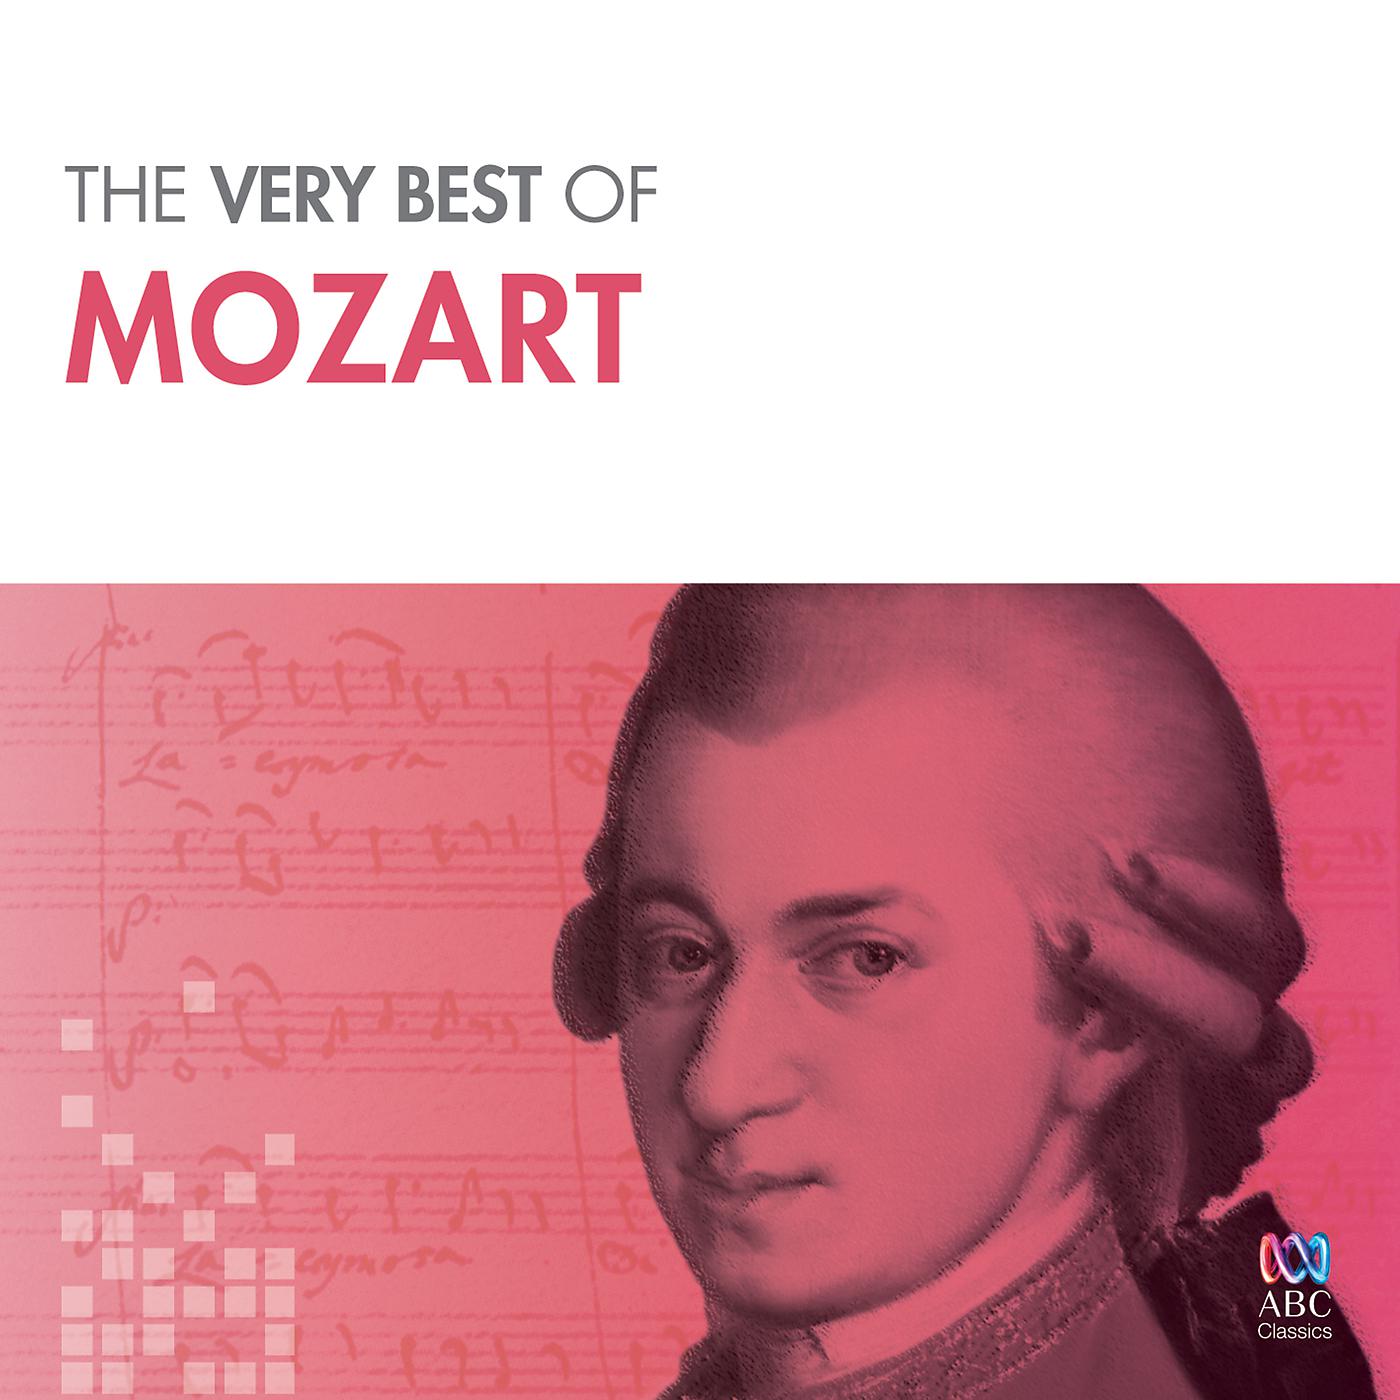 Моцарт the best. The very best of Mozart 2cd. Моцарт обложка. Моцарт альбом.